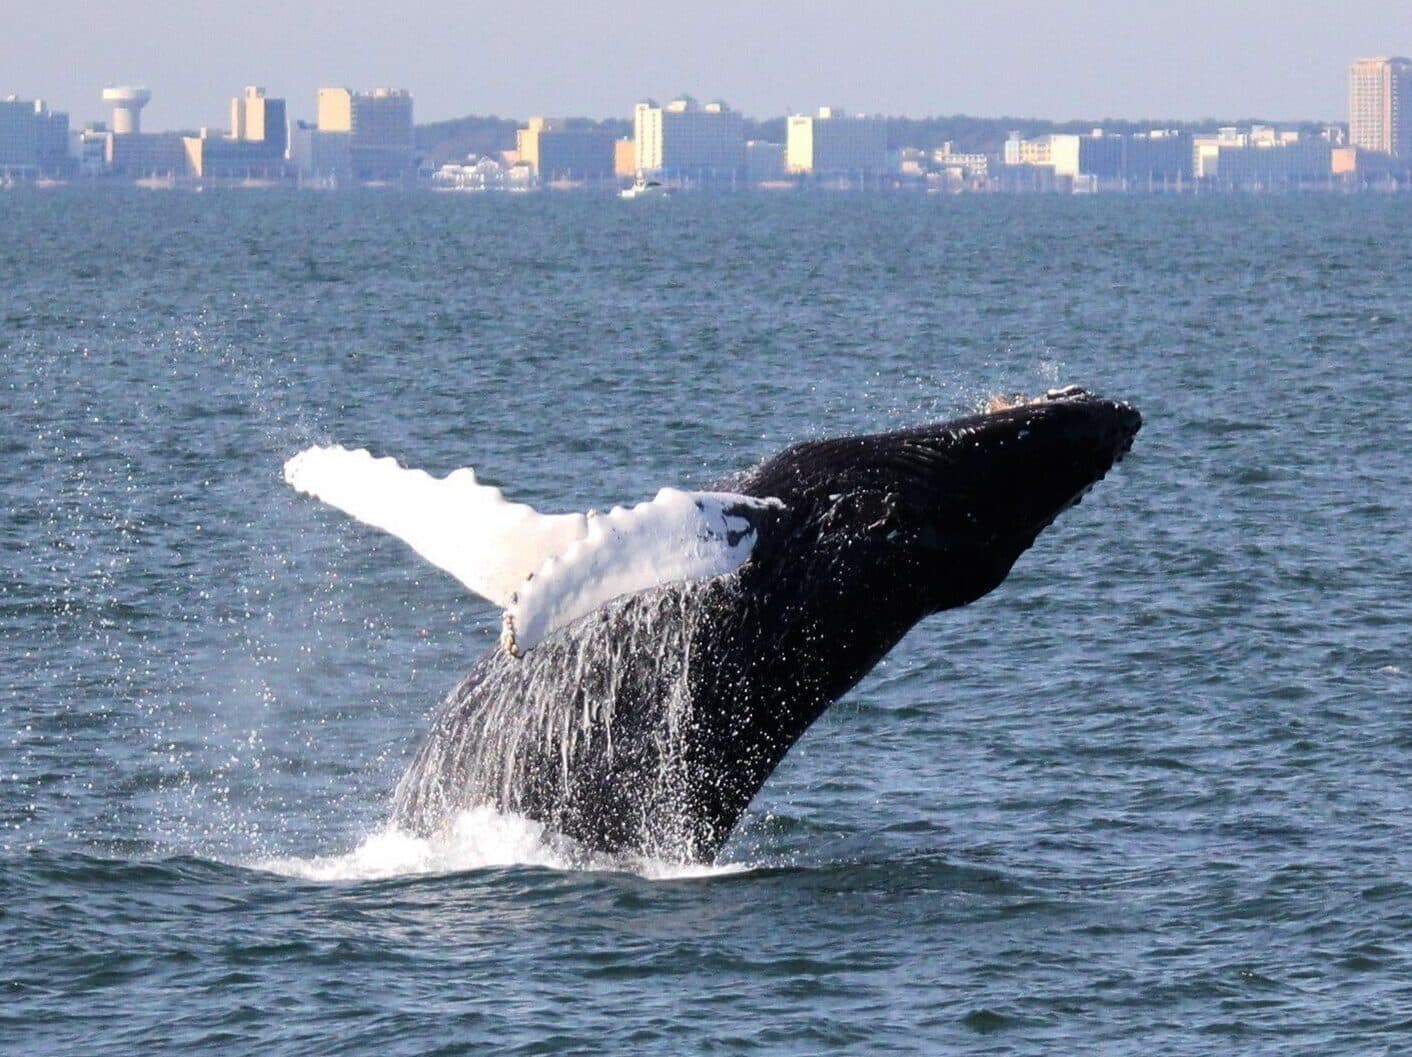 A humpback whale breaches in front of the Virginia Beach coastline.